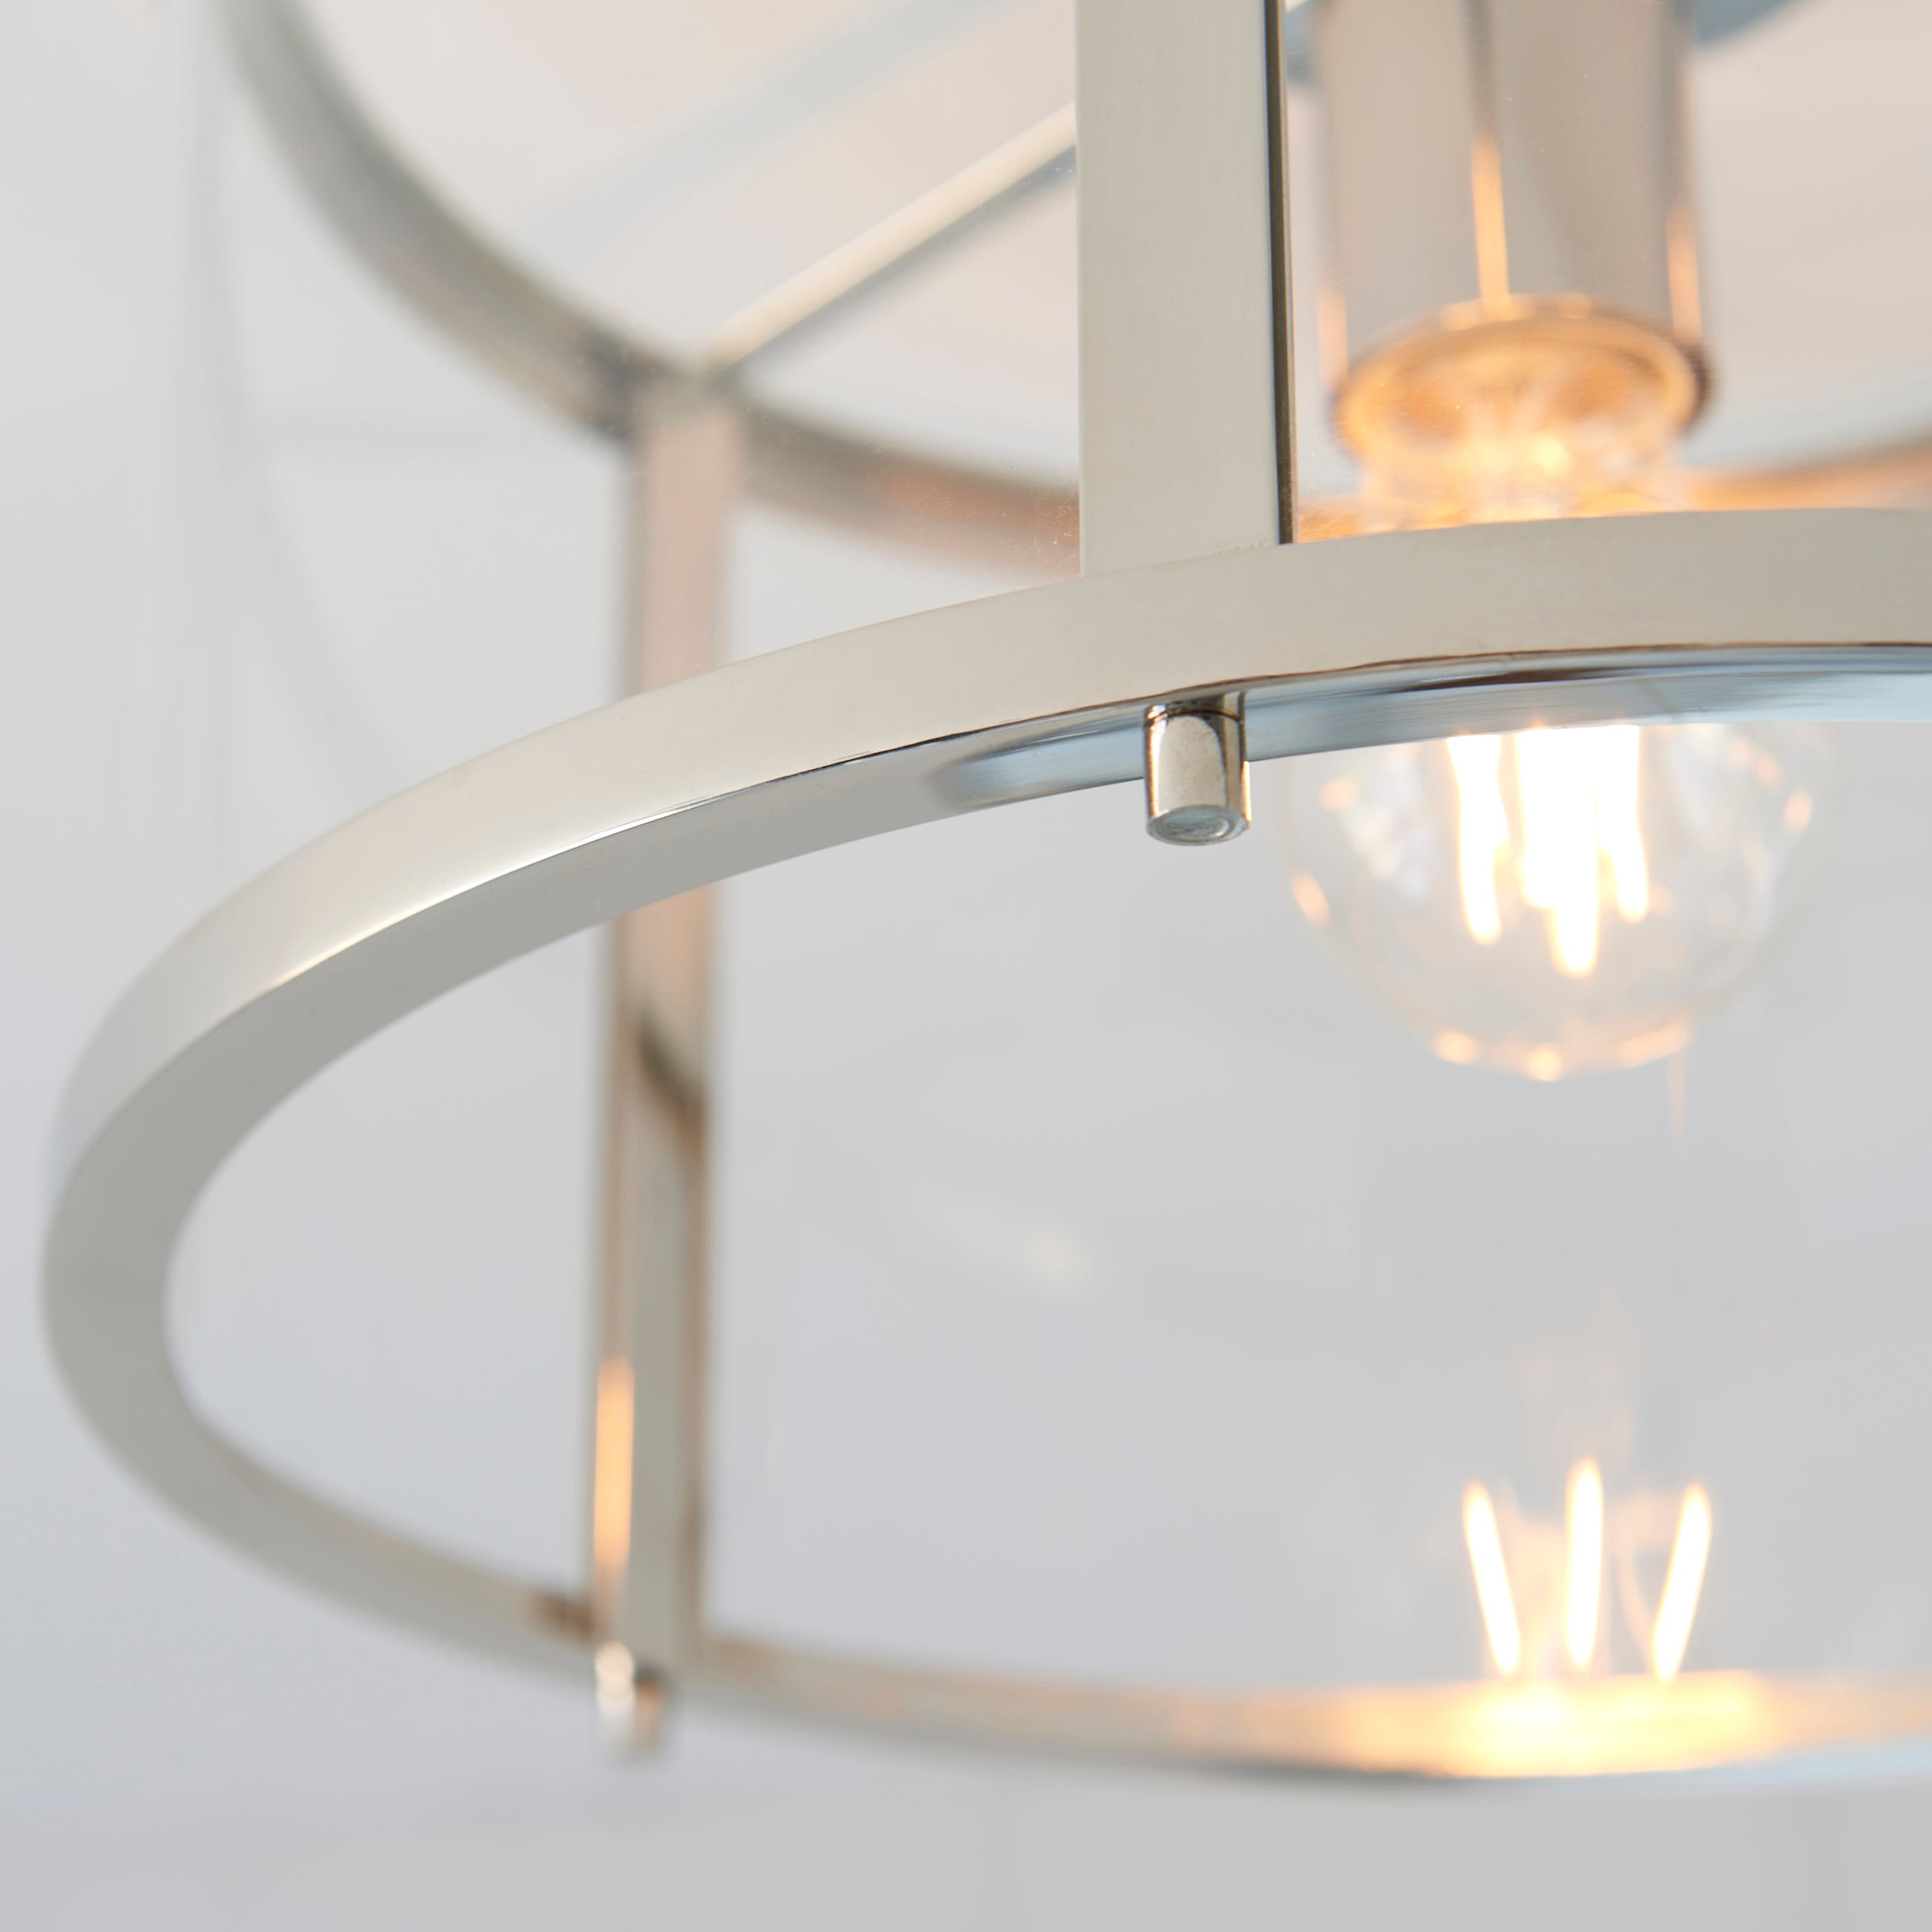 Hopton Simple Bright Nickel and Glass Ceiling Light